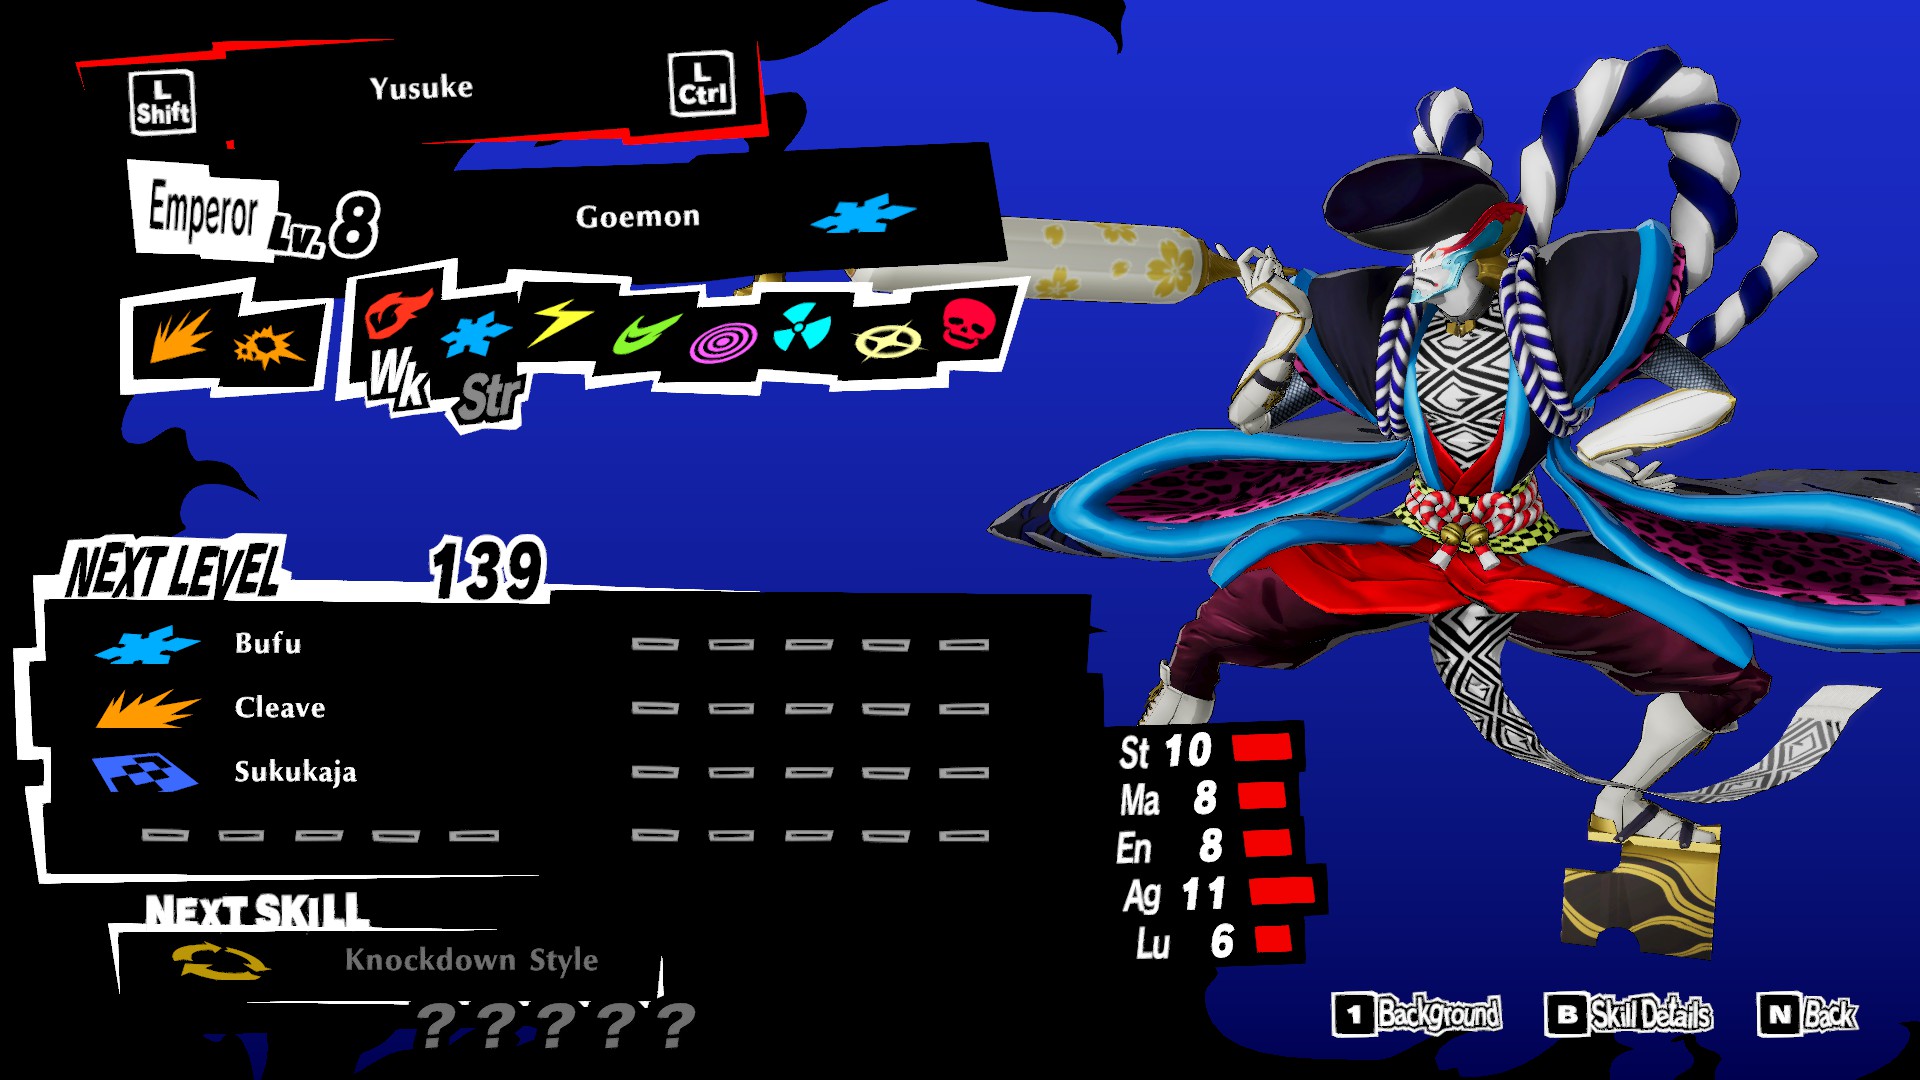 Persona 5 Strikers: Guides and features hub - PC Invasion